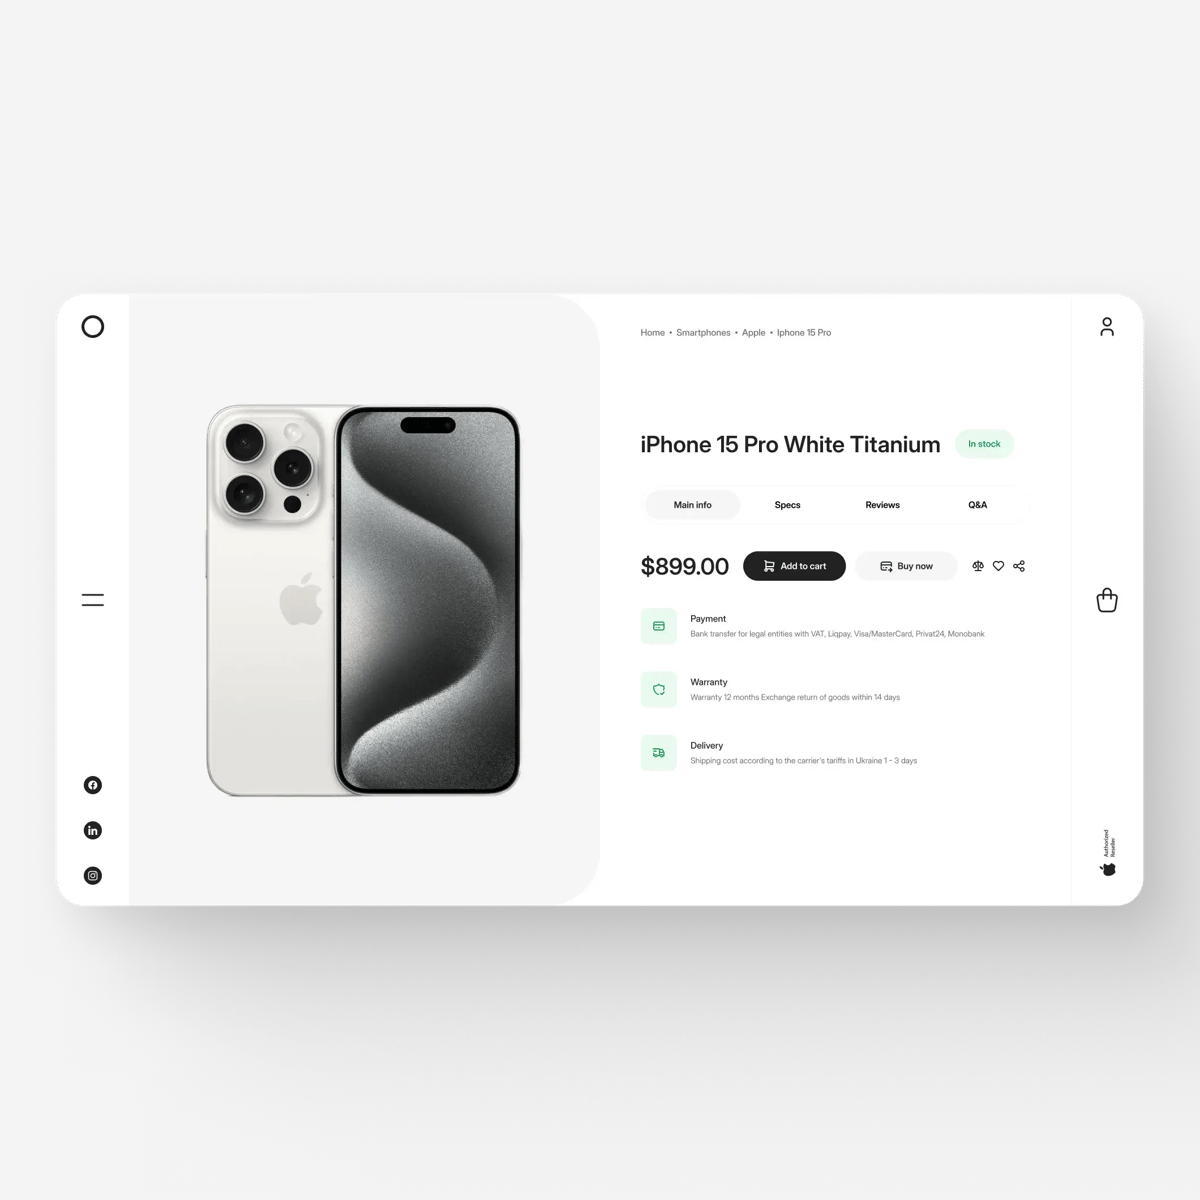 Concept design for an online store